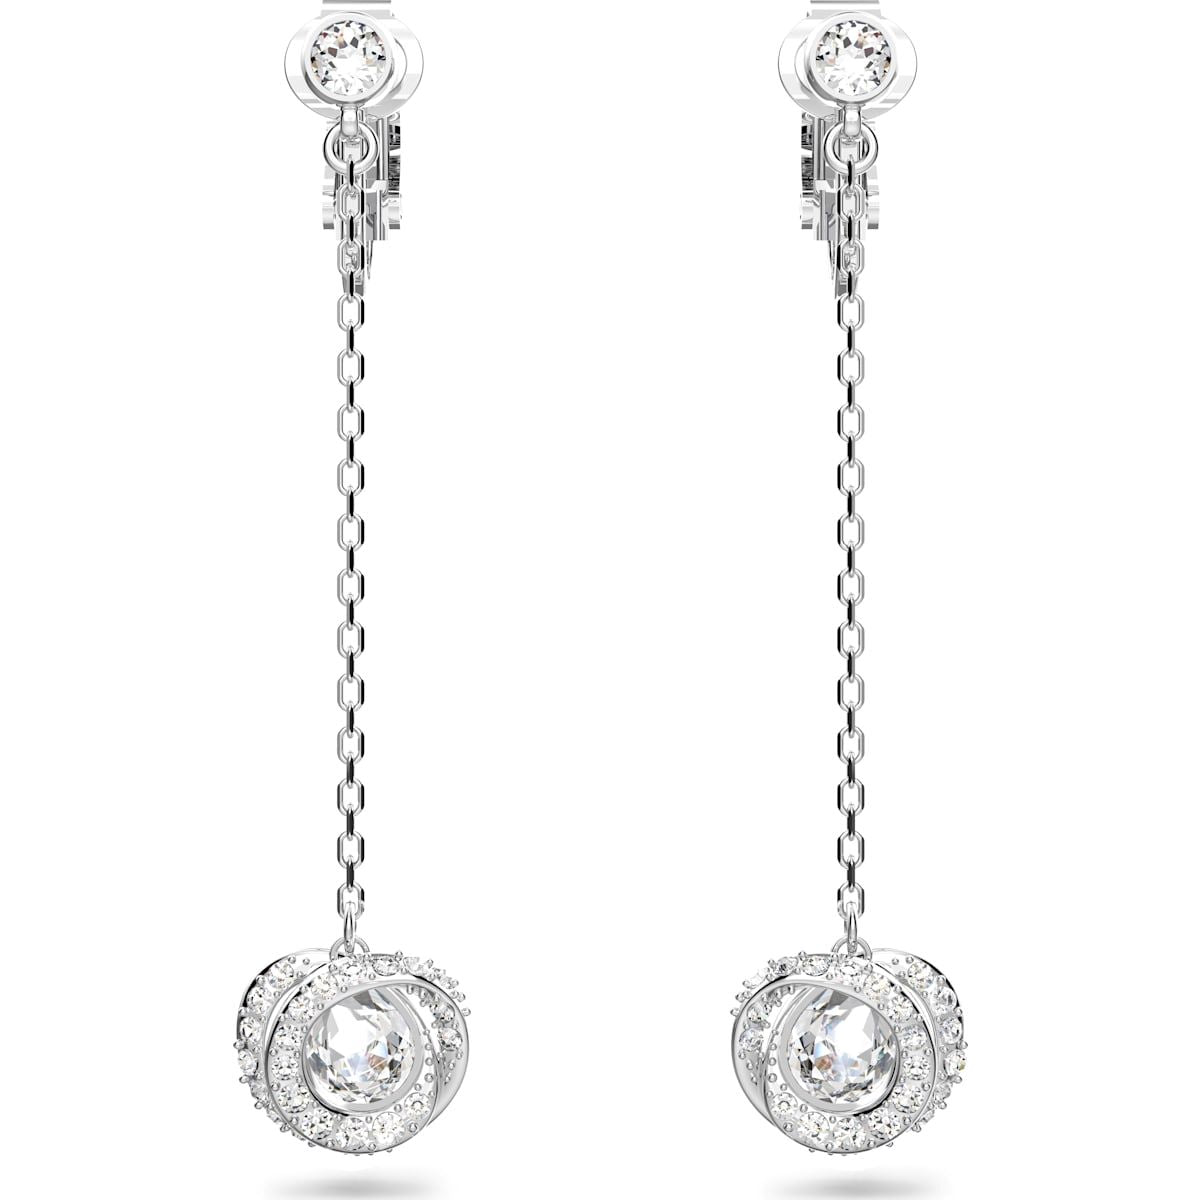 Swarovski Hollow Rhodium Plated Long White Crystal Clip Earrings D